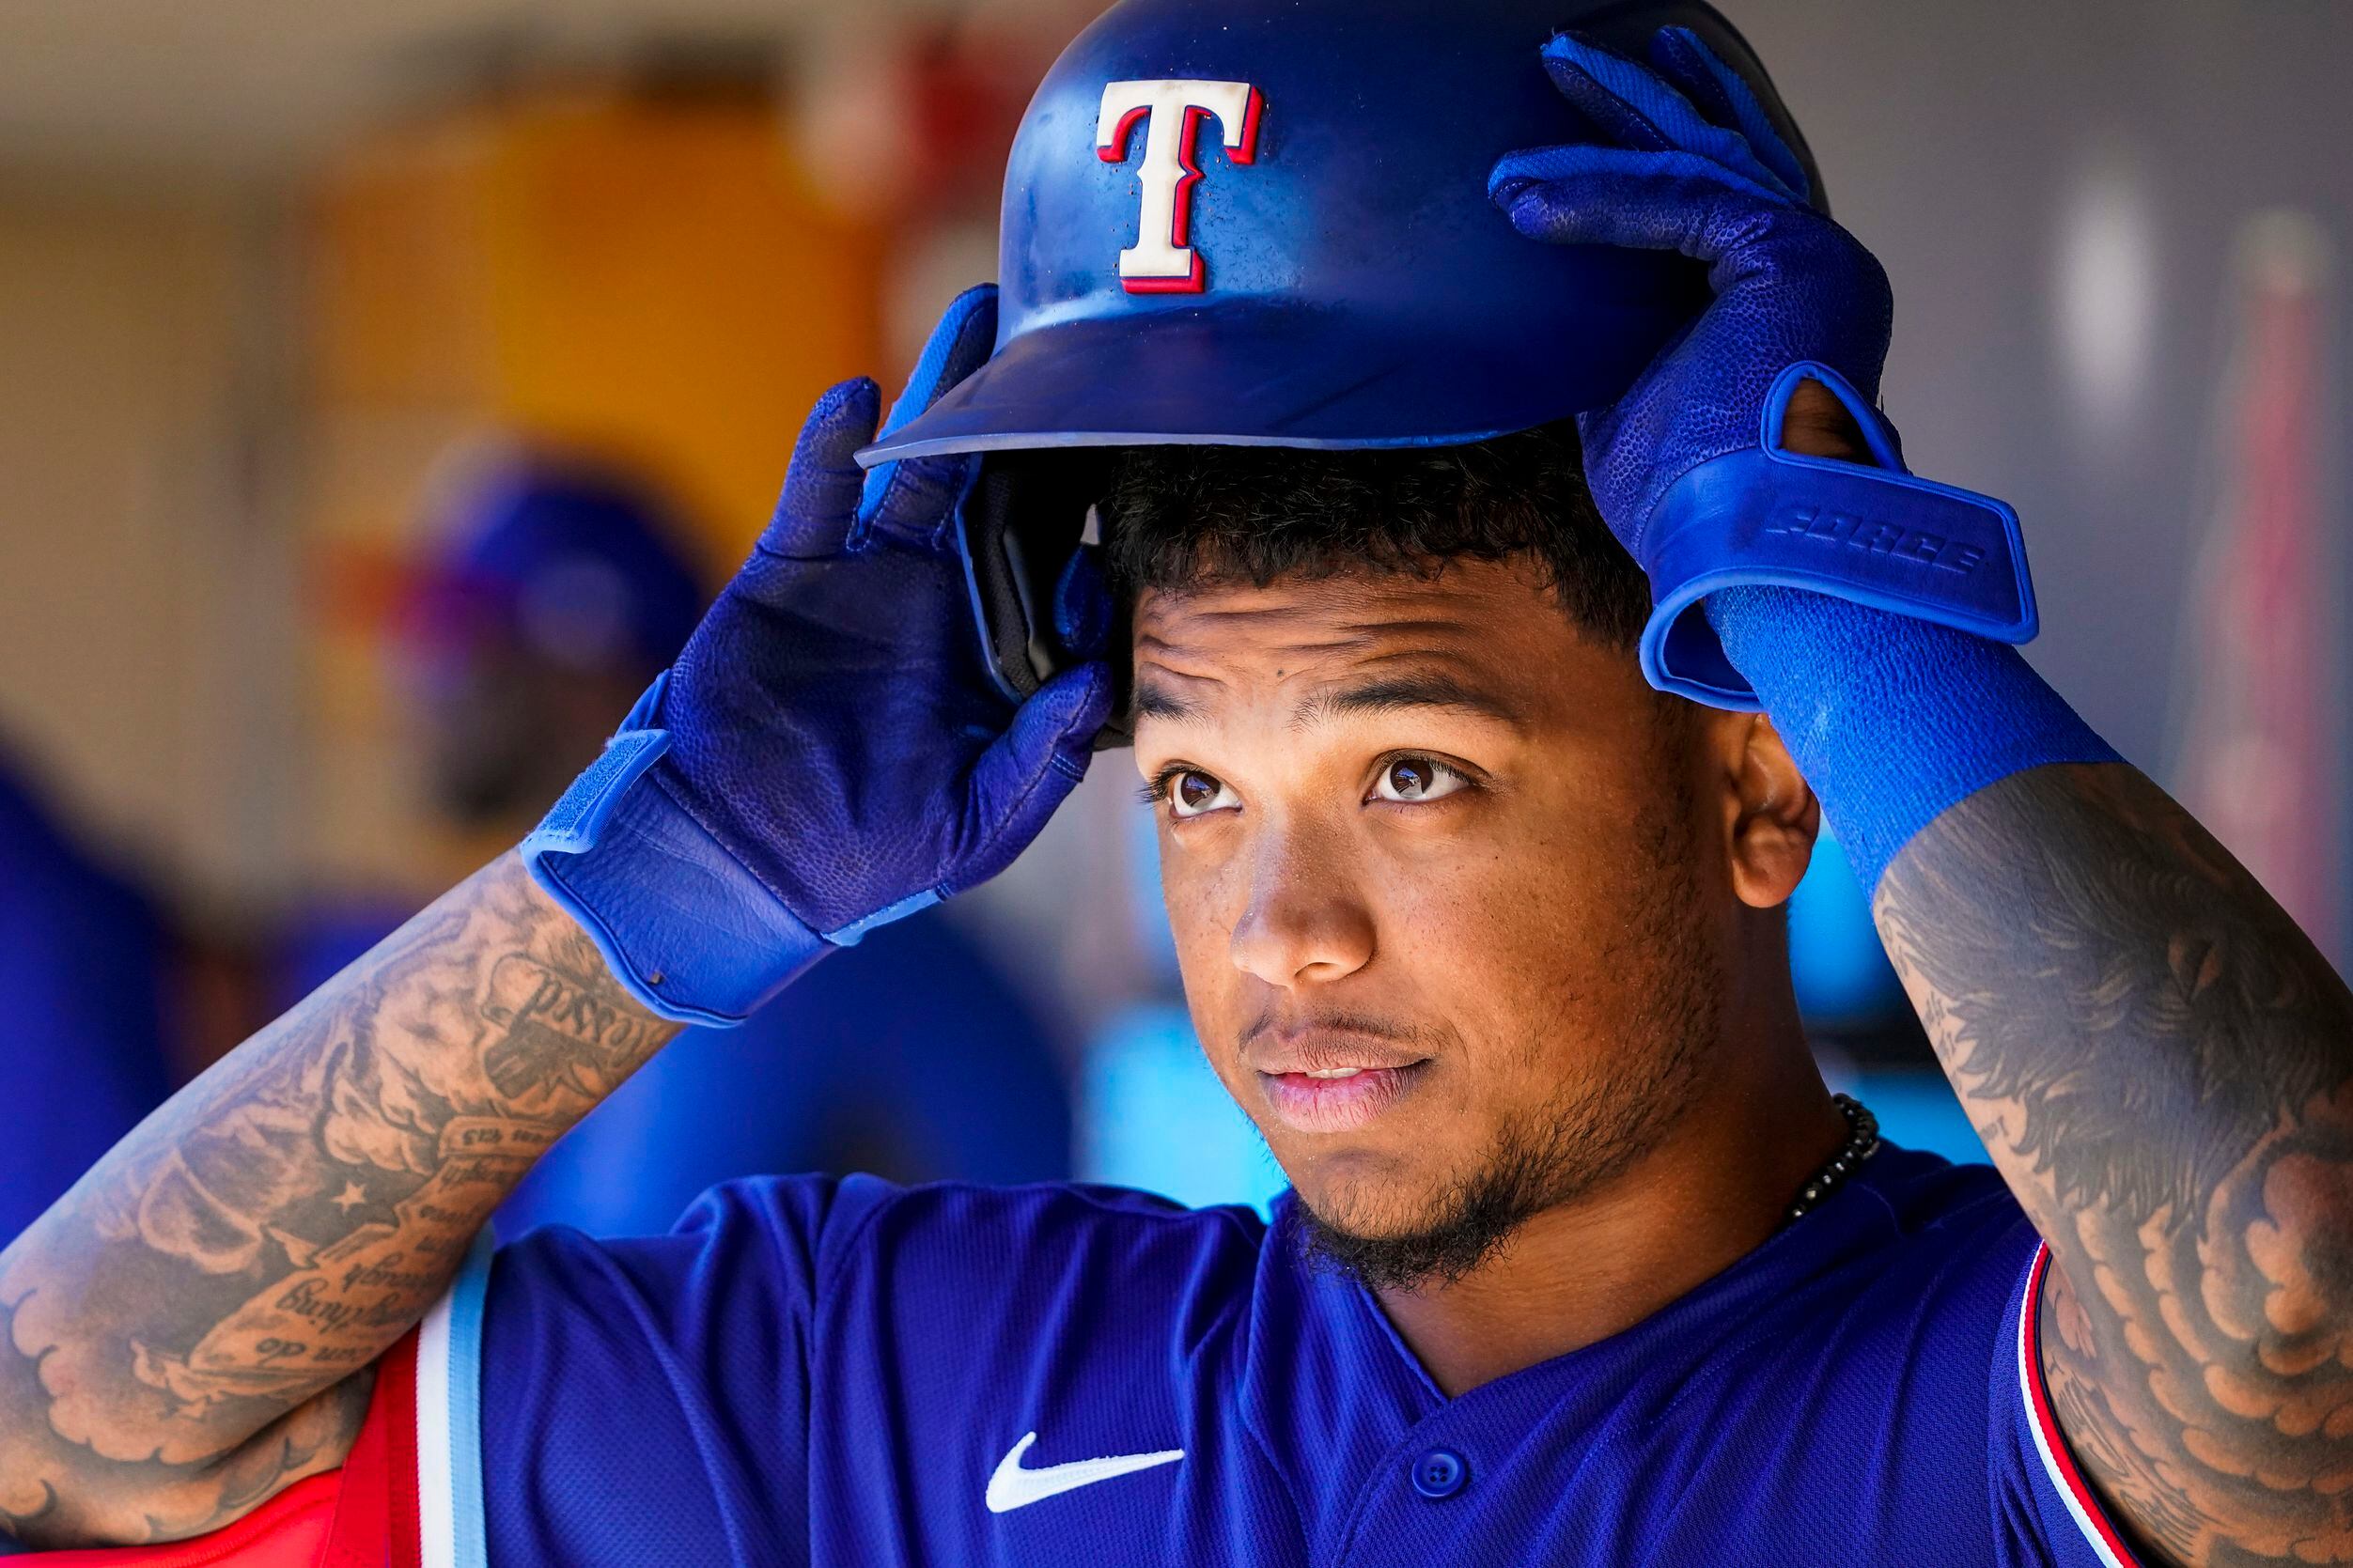 Texas Rangers outfielder Willie Calhoun puts on his batting helmet in the dugout before a...